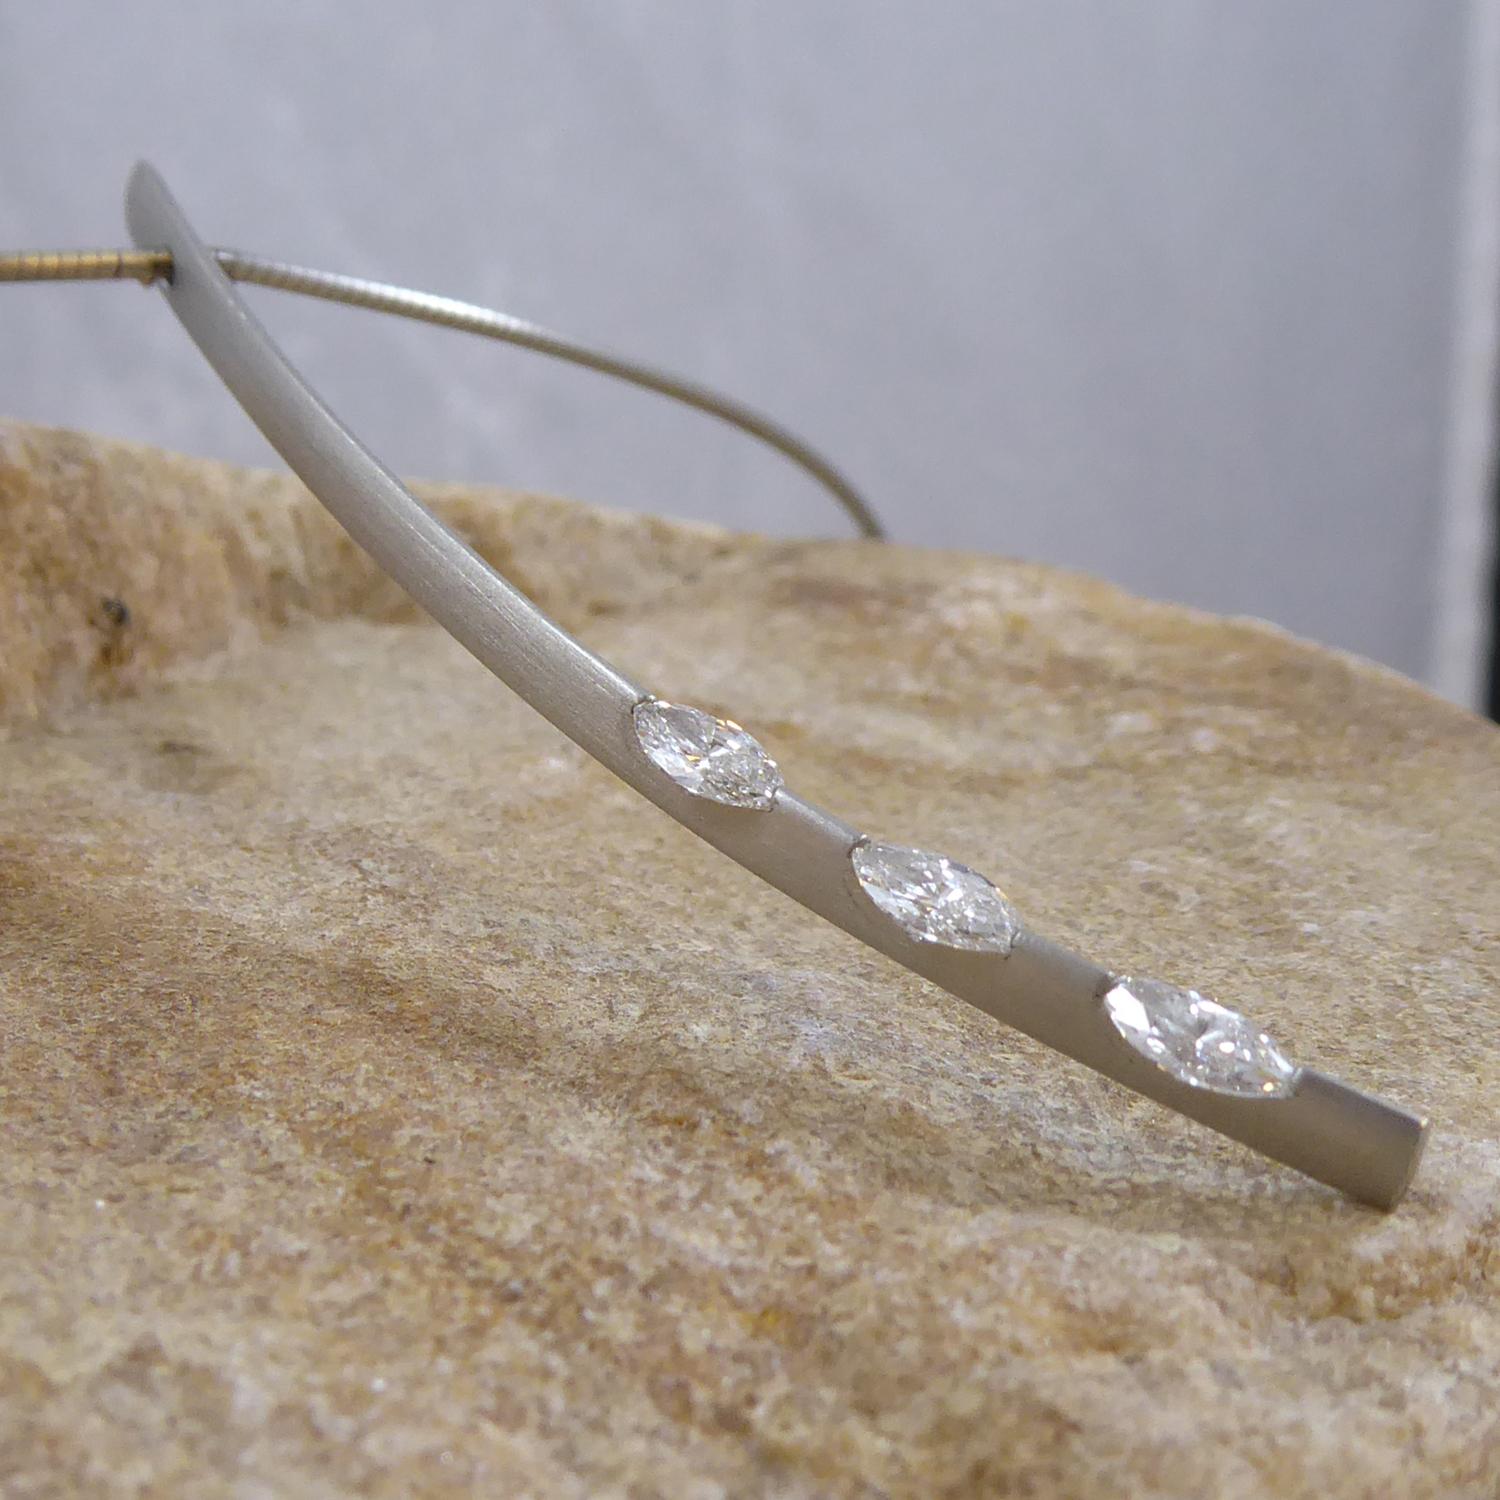 A very avant-guarde diamond pendant from the UK jewellery designer, Paul Spurgeon.  A curved, knife-edge top, platinum bar set with three marquise cut diamonds invisibly tension set to the lower half of the bar.  The diamond combine to give a total